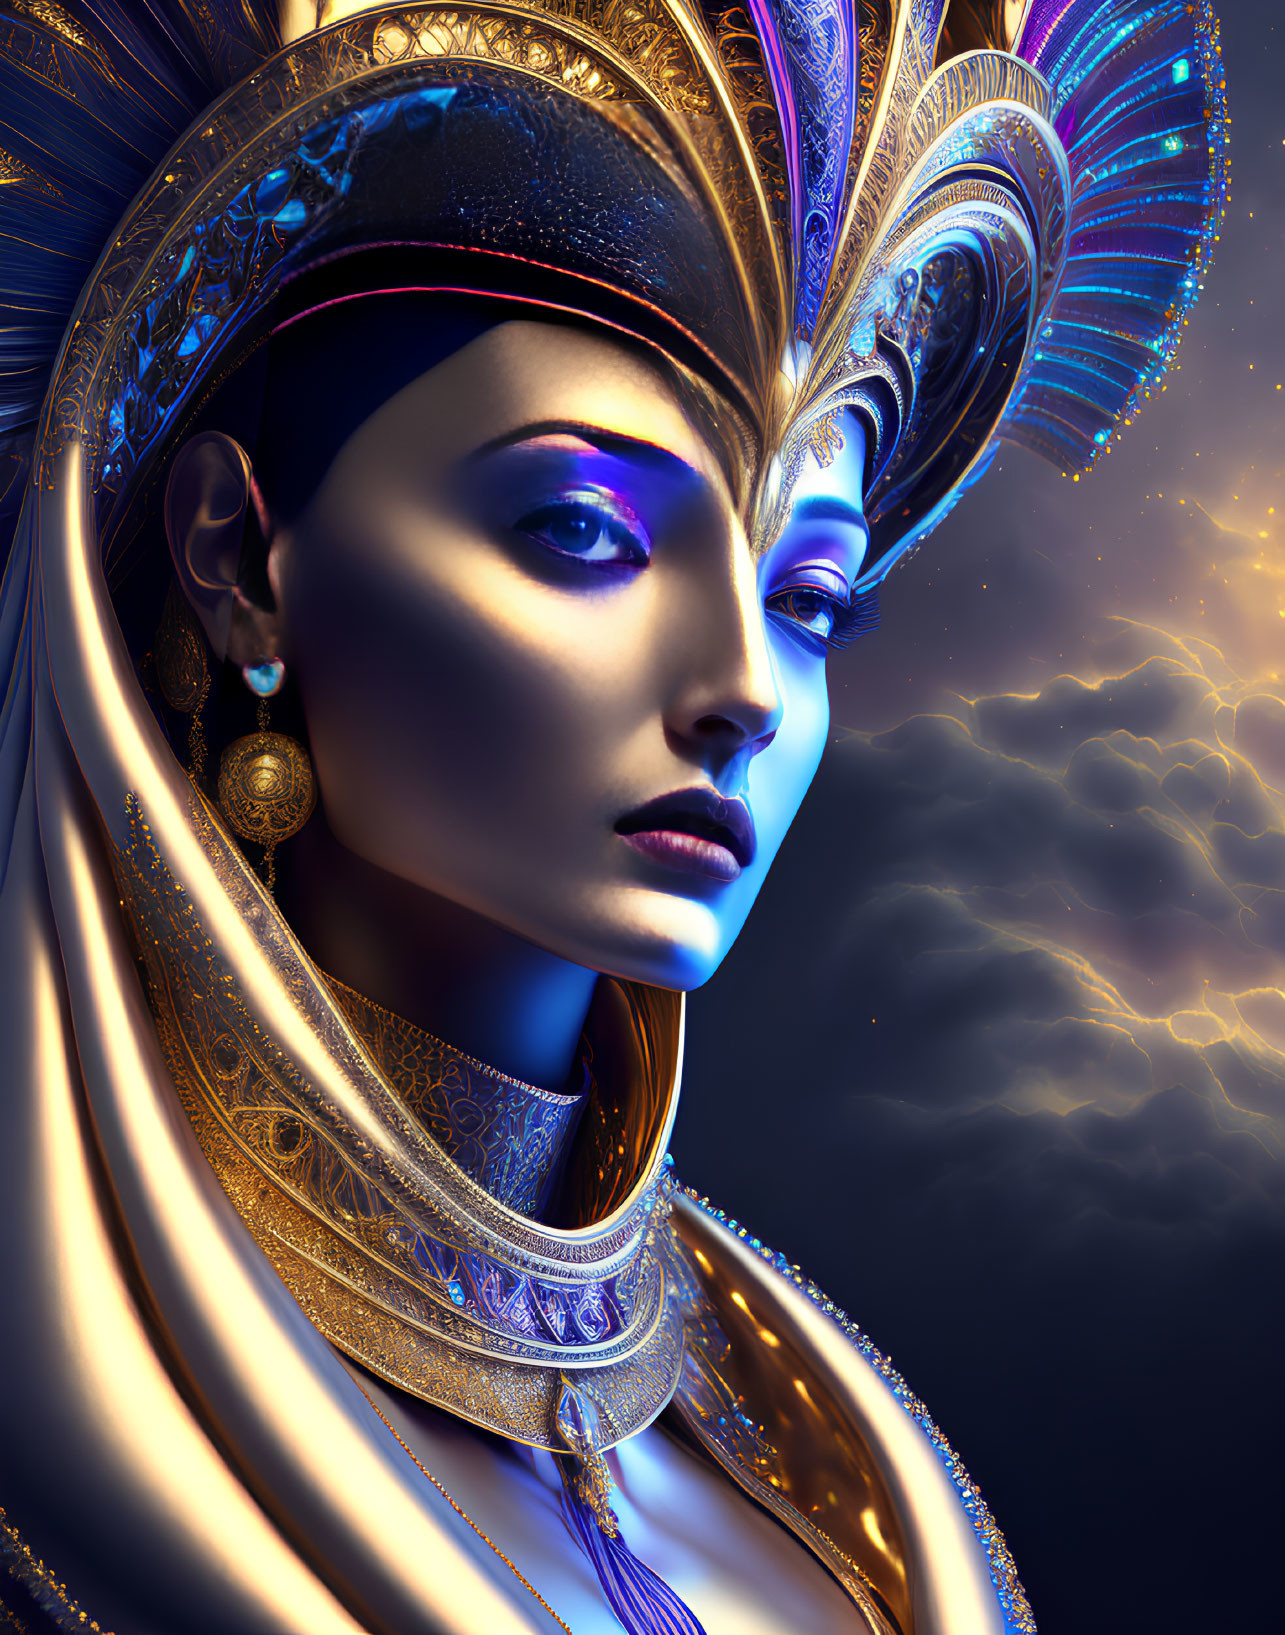 Woman with Luminous Makeup and Ornate Headdress in Regal Cosmic Setting